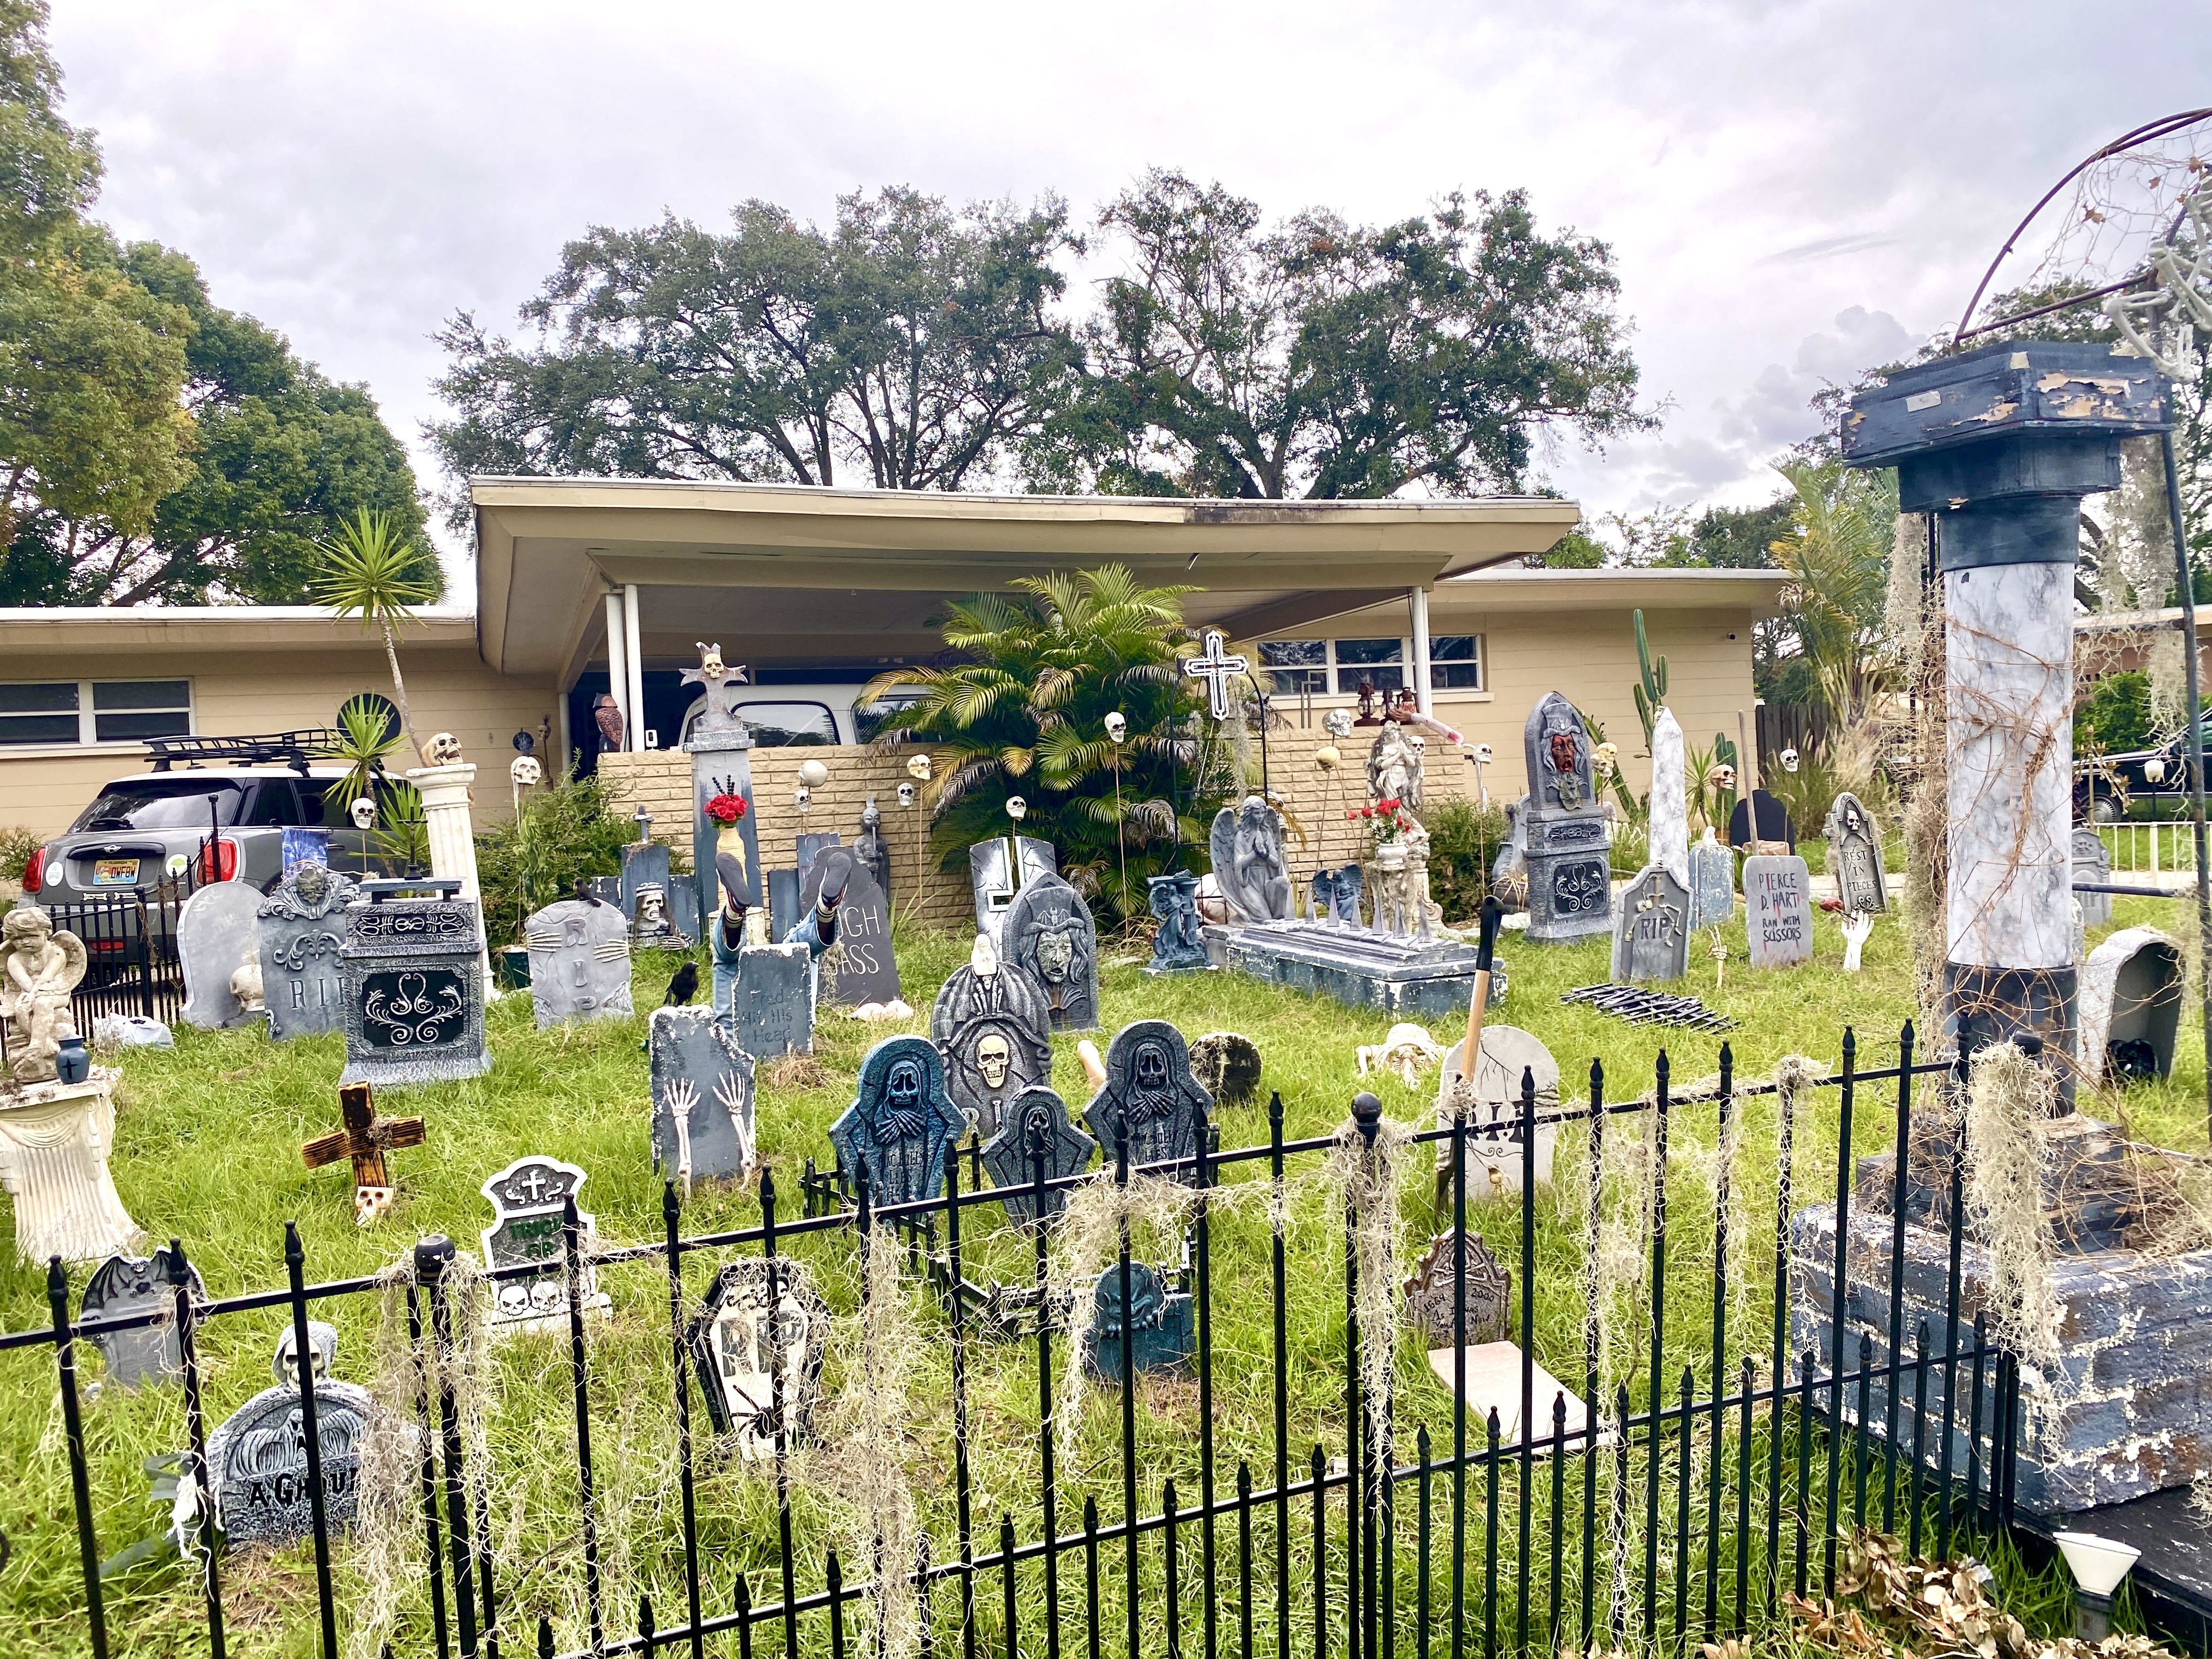 The "Camphor Heights Cemetery" pops up each year around Halloween, with its own Facebook fan page. The theme for 2022 is "Demented Fun House."